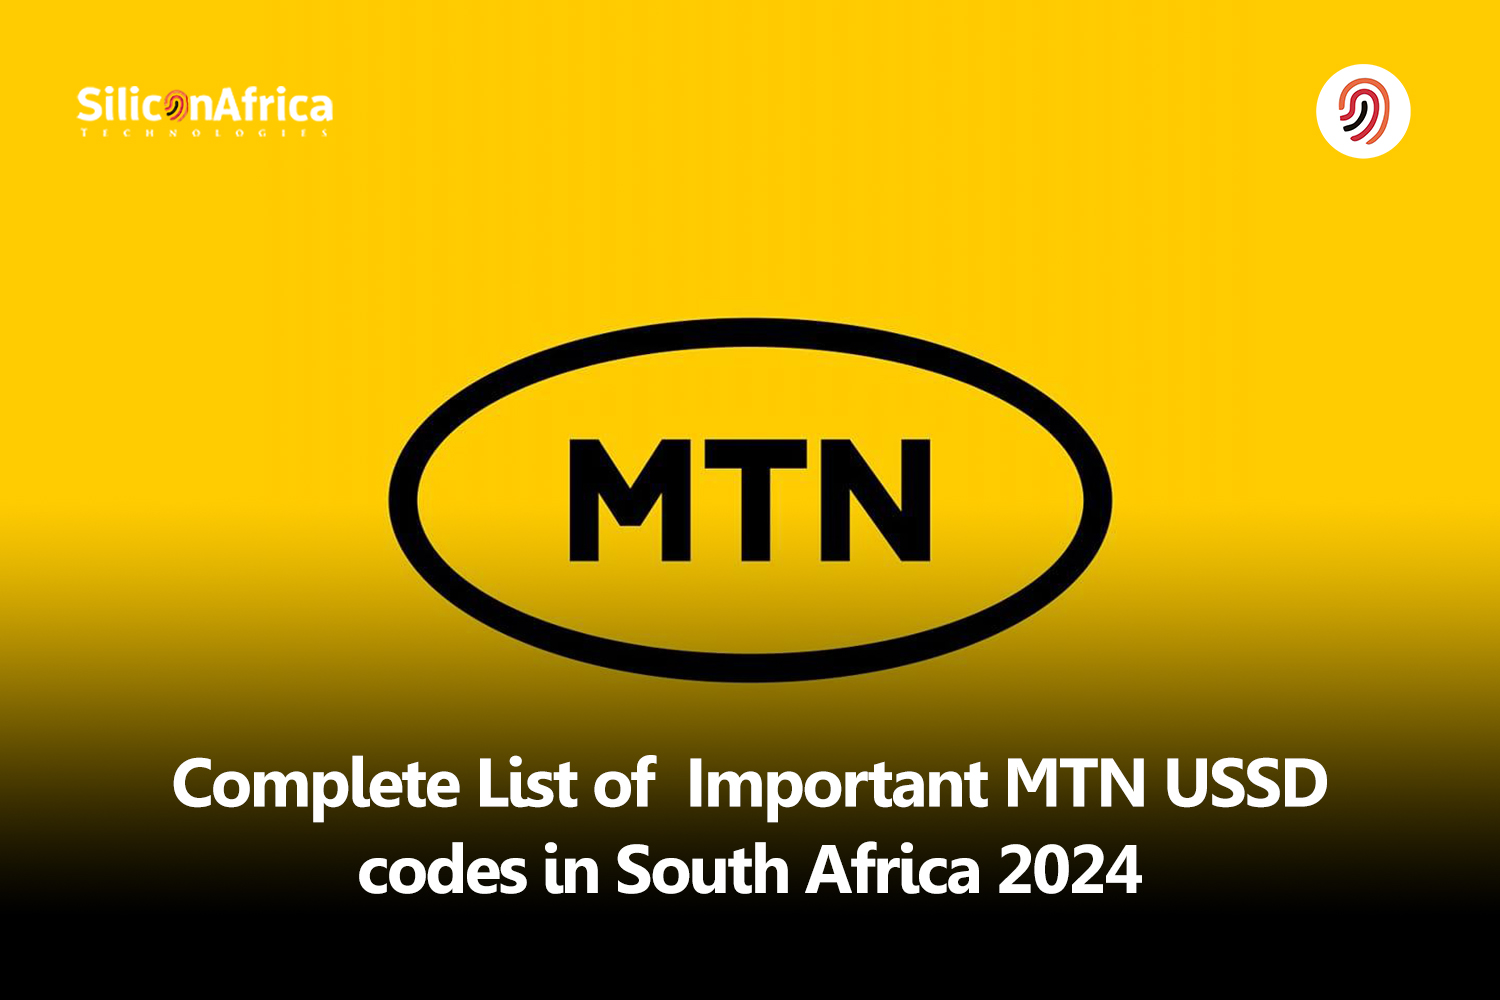 Complete List of Important MTN USSD Codes in South Africa 2024